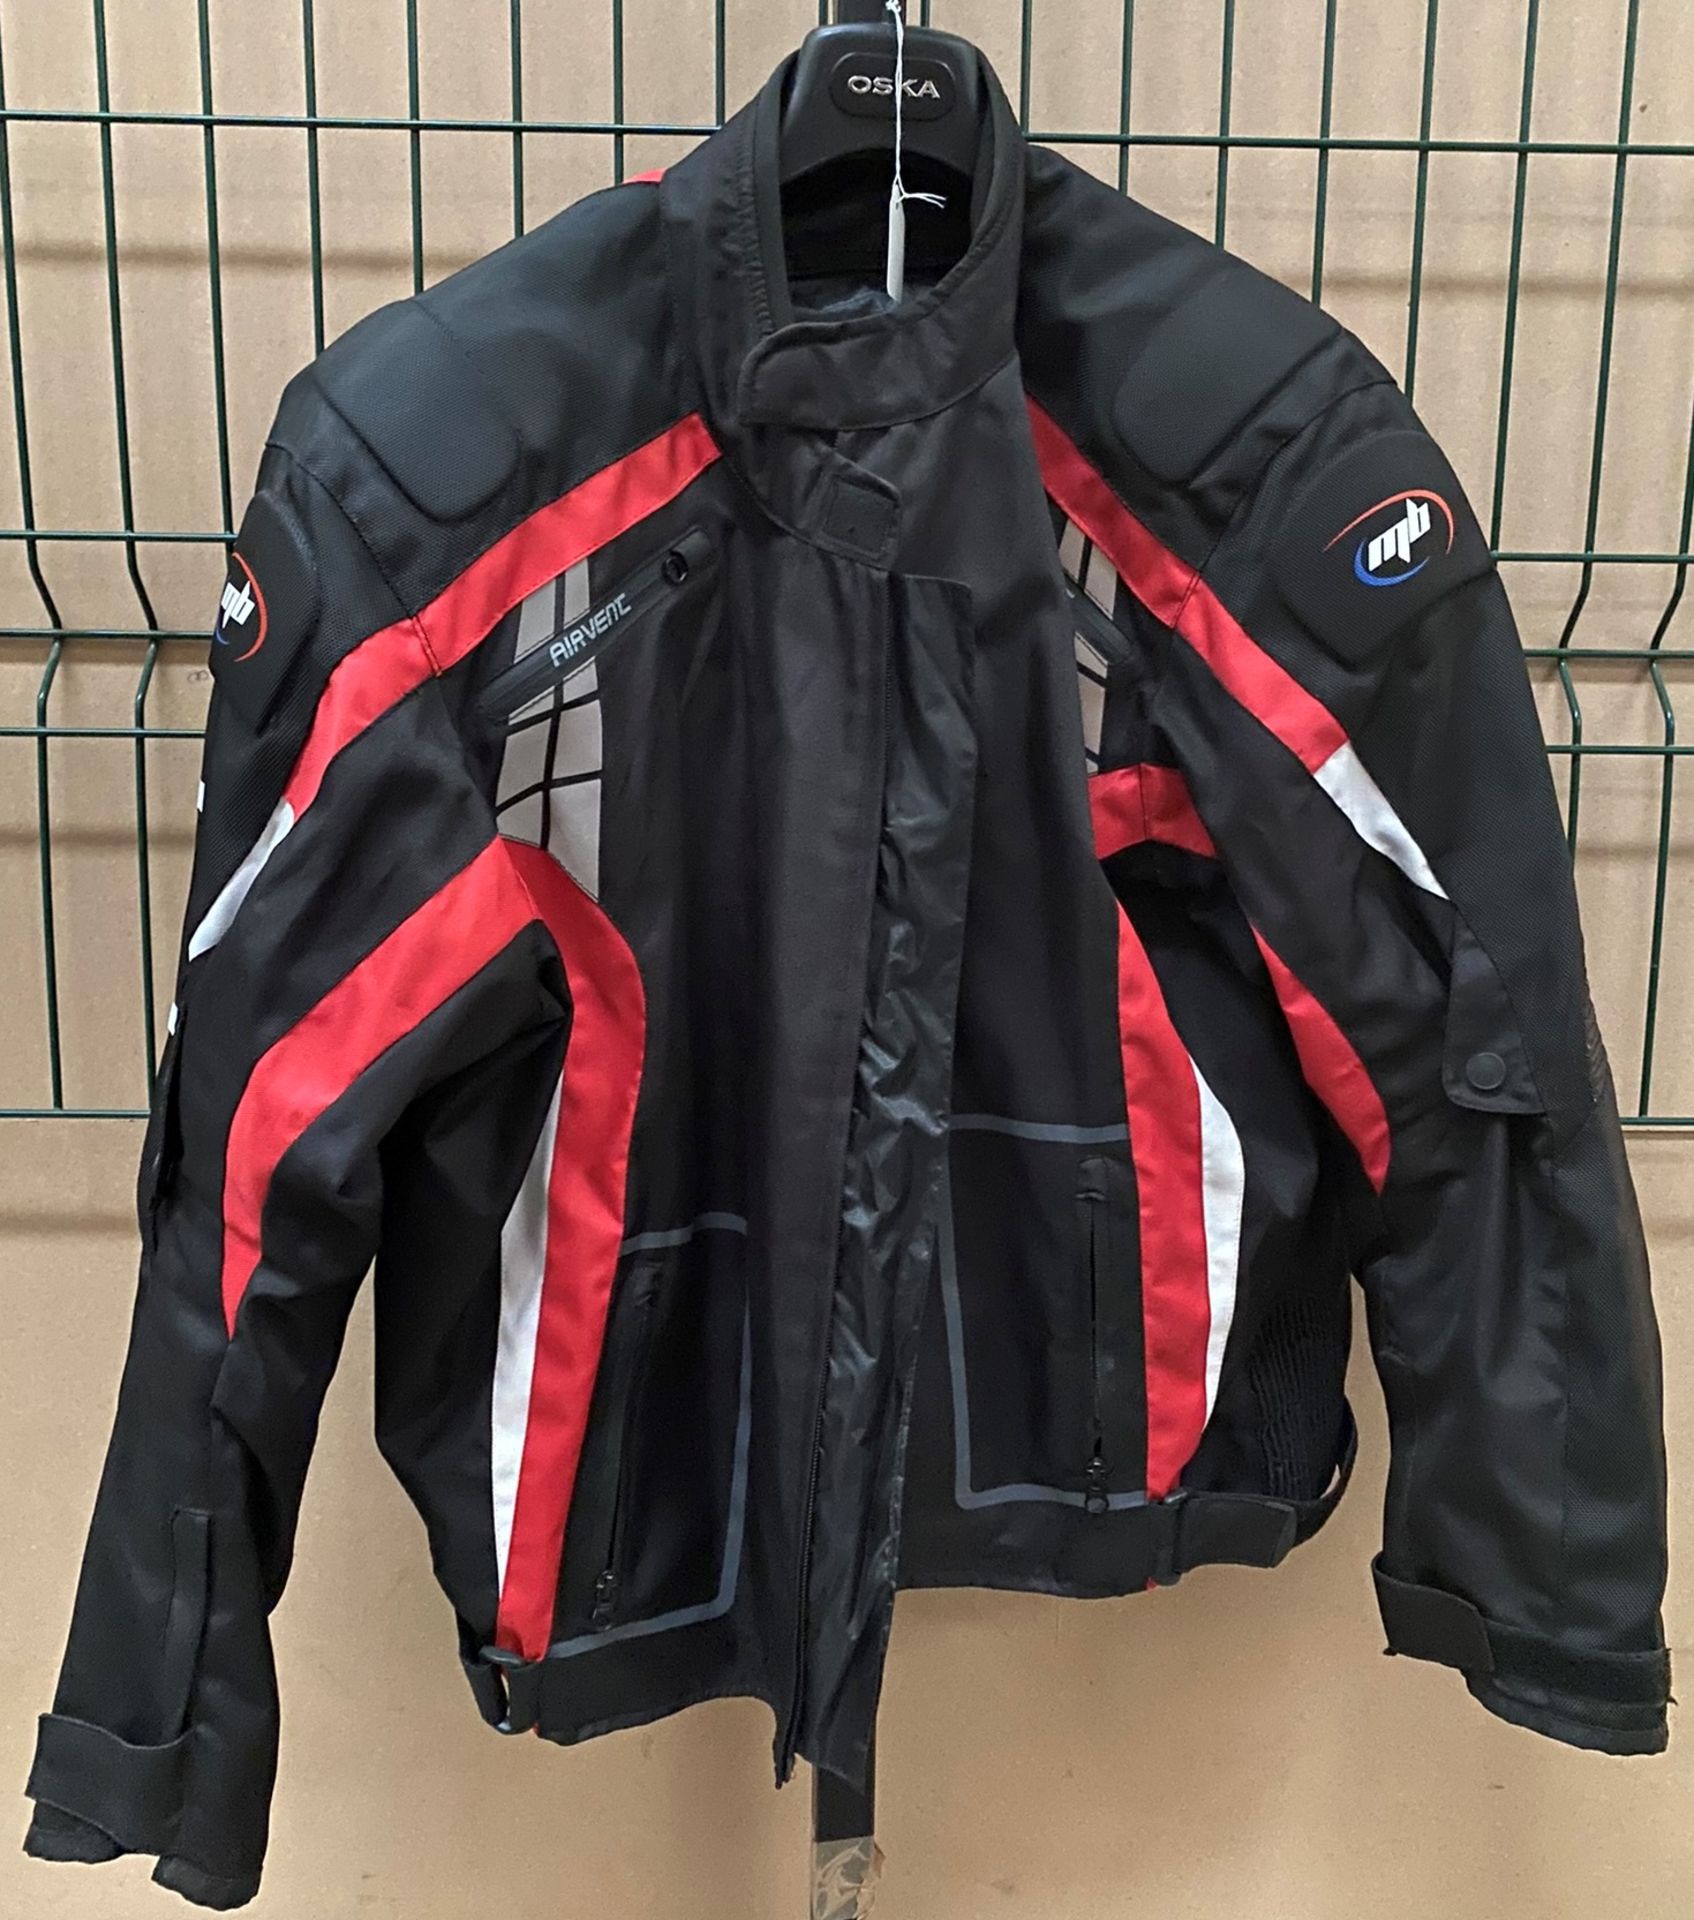 An M8 Airvent black and red padded motor cycle jacket, size L - looks hardly used.